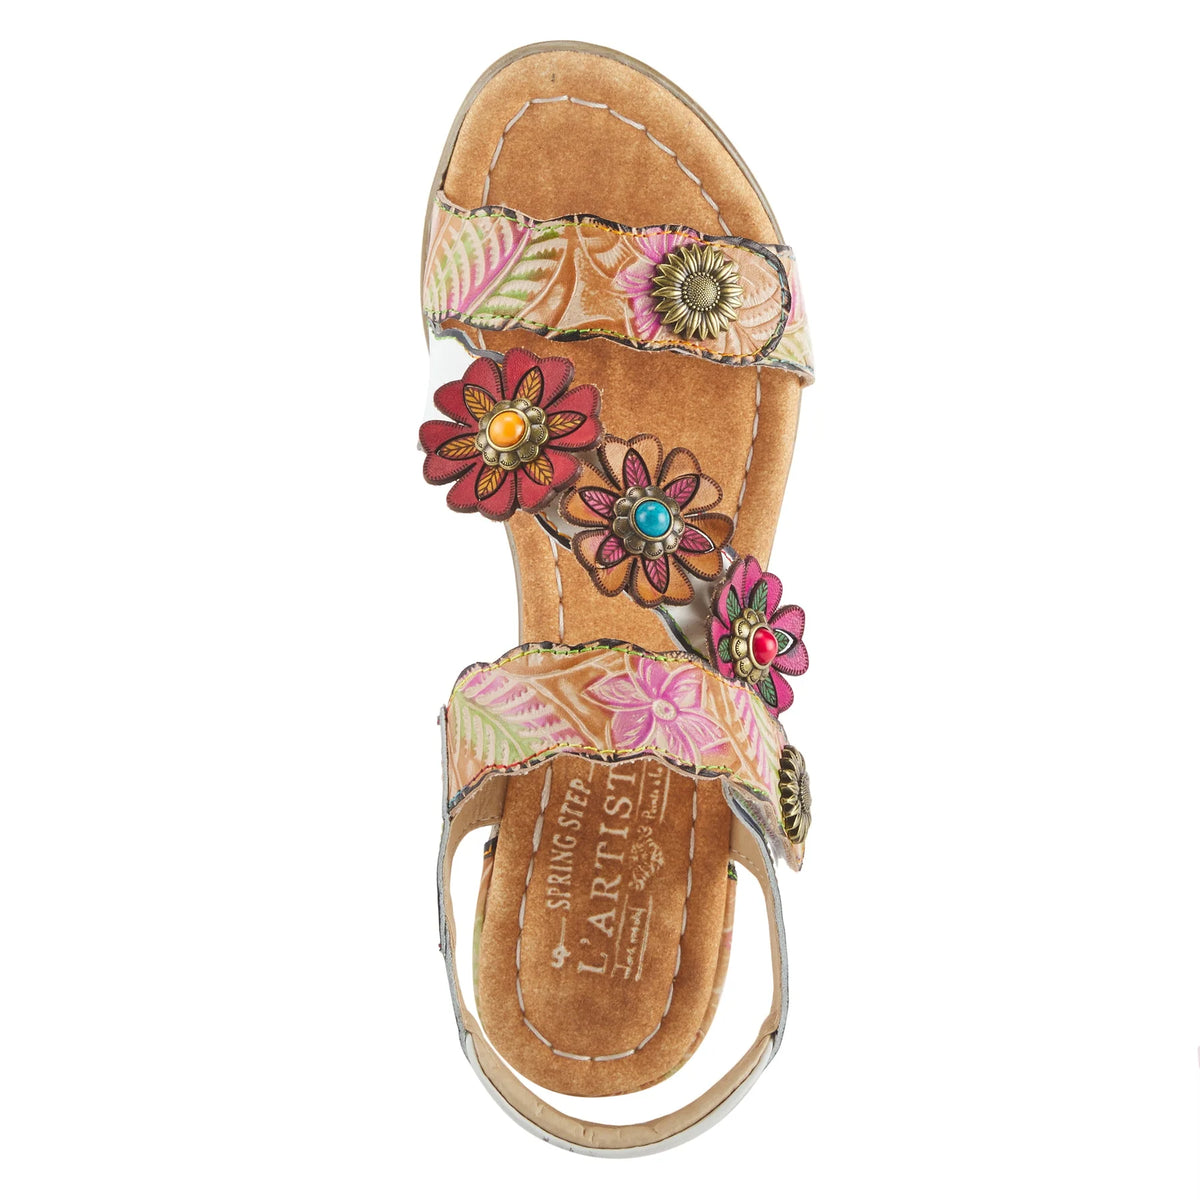 Springstep Shoes Spring Step Footwear Flower Shoes Sandal Heel Womens Shoe L'Artiste Style: AROMAS  These sling back sandals are positively blooming with charm. It features embossed and 3D florals crisscrossing your foot with an adjustable hook and loop Velcro strap at the ankle. The floral design continues on the back of the heel so you'll be seen at all angles.